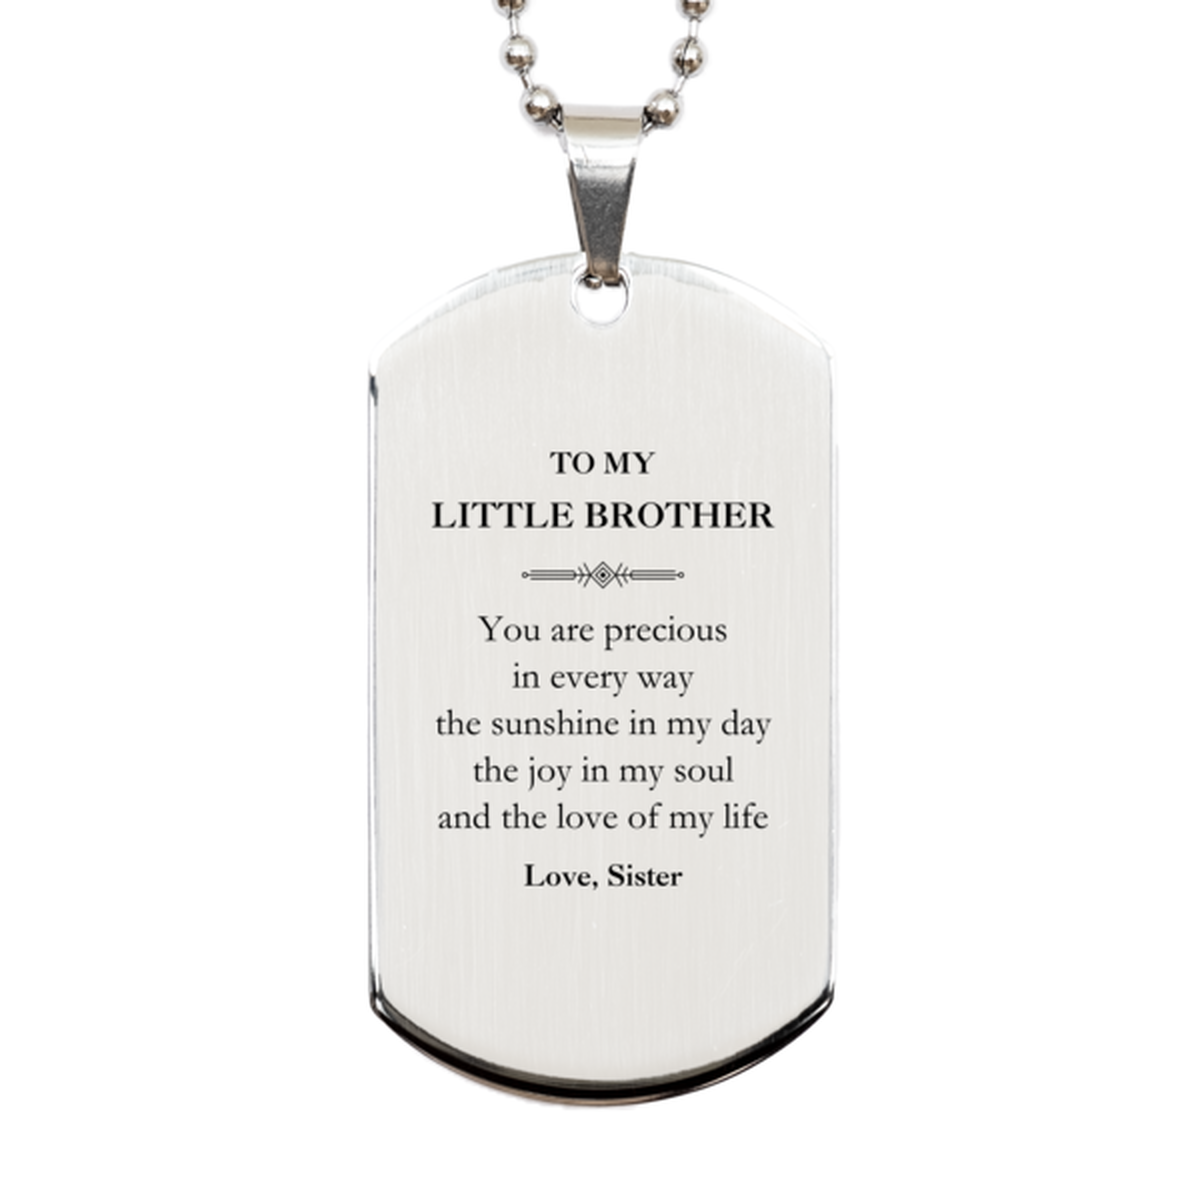 Graduation Gifts for Little Brother Silver Dog Tag Present from Sister, Christmas Little Brother Birthday Gifts Little Brother You are precious in every way the sunshine in my day. Love, Sister